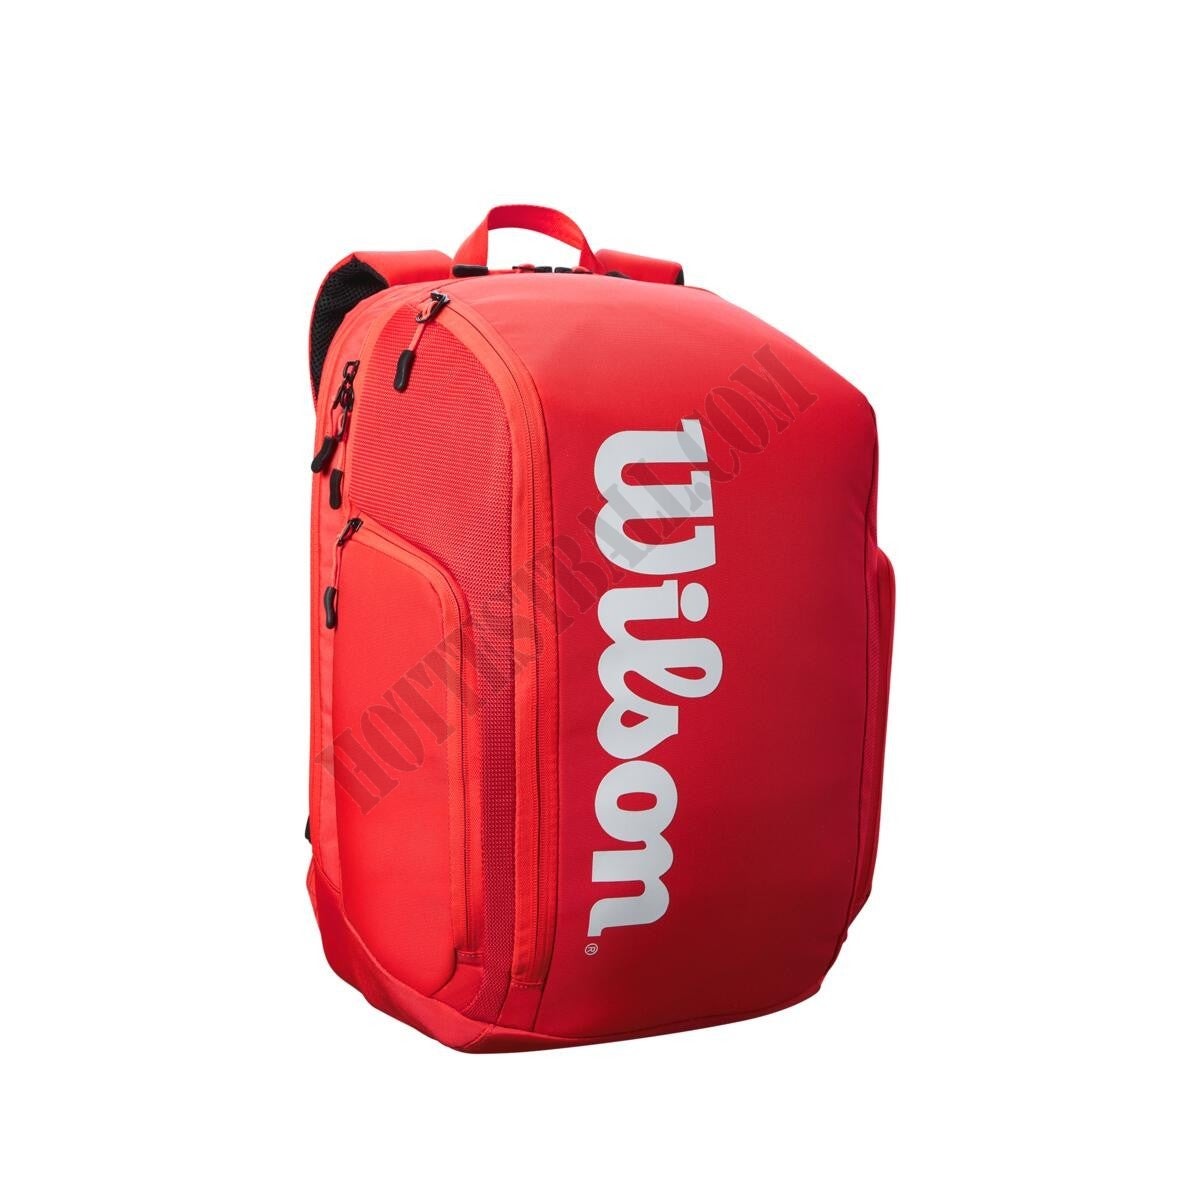 Super Tour Backpack - Wilson Discount Store - -1